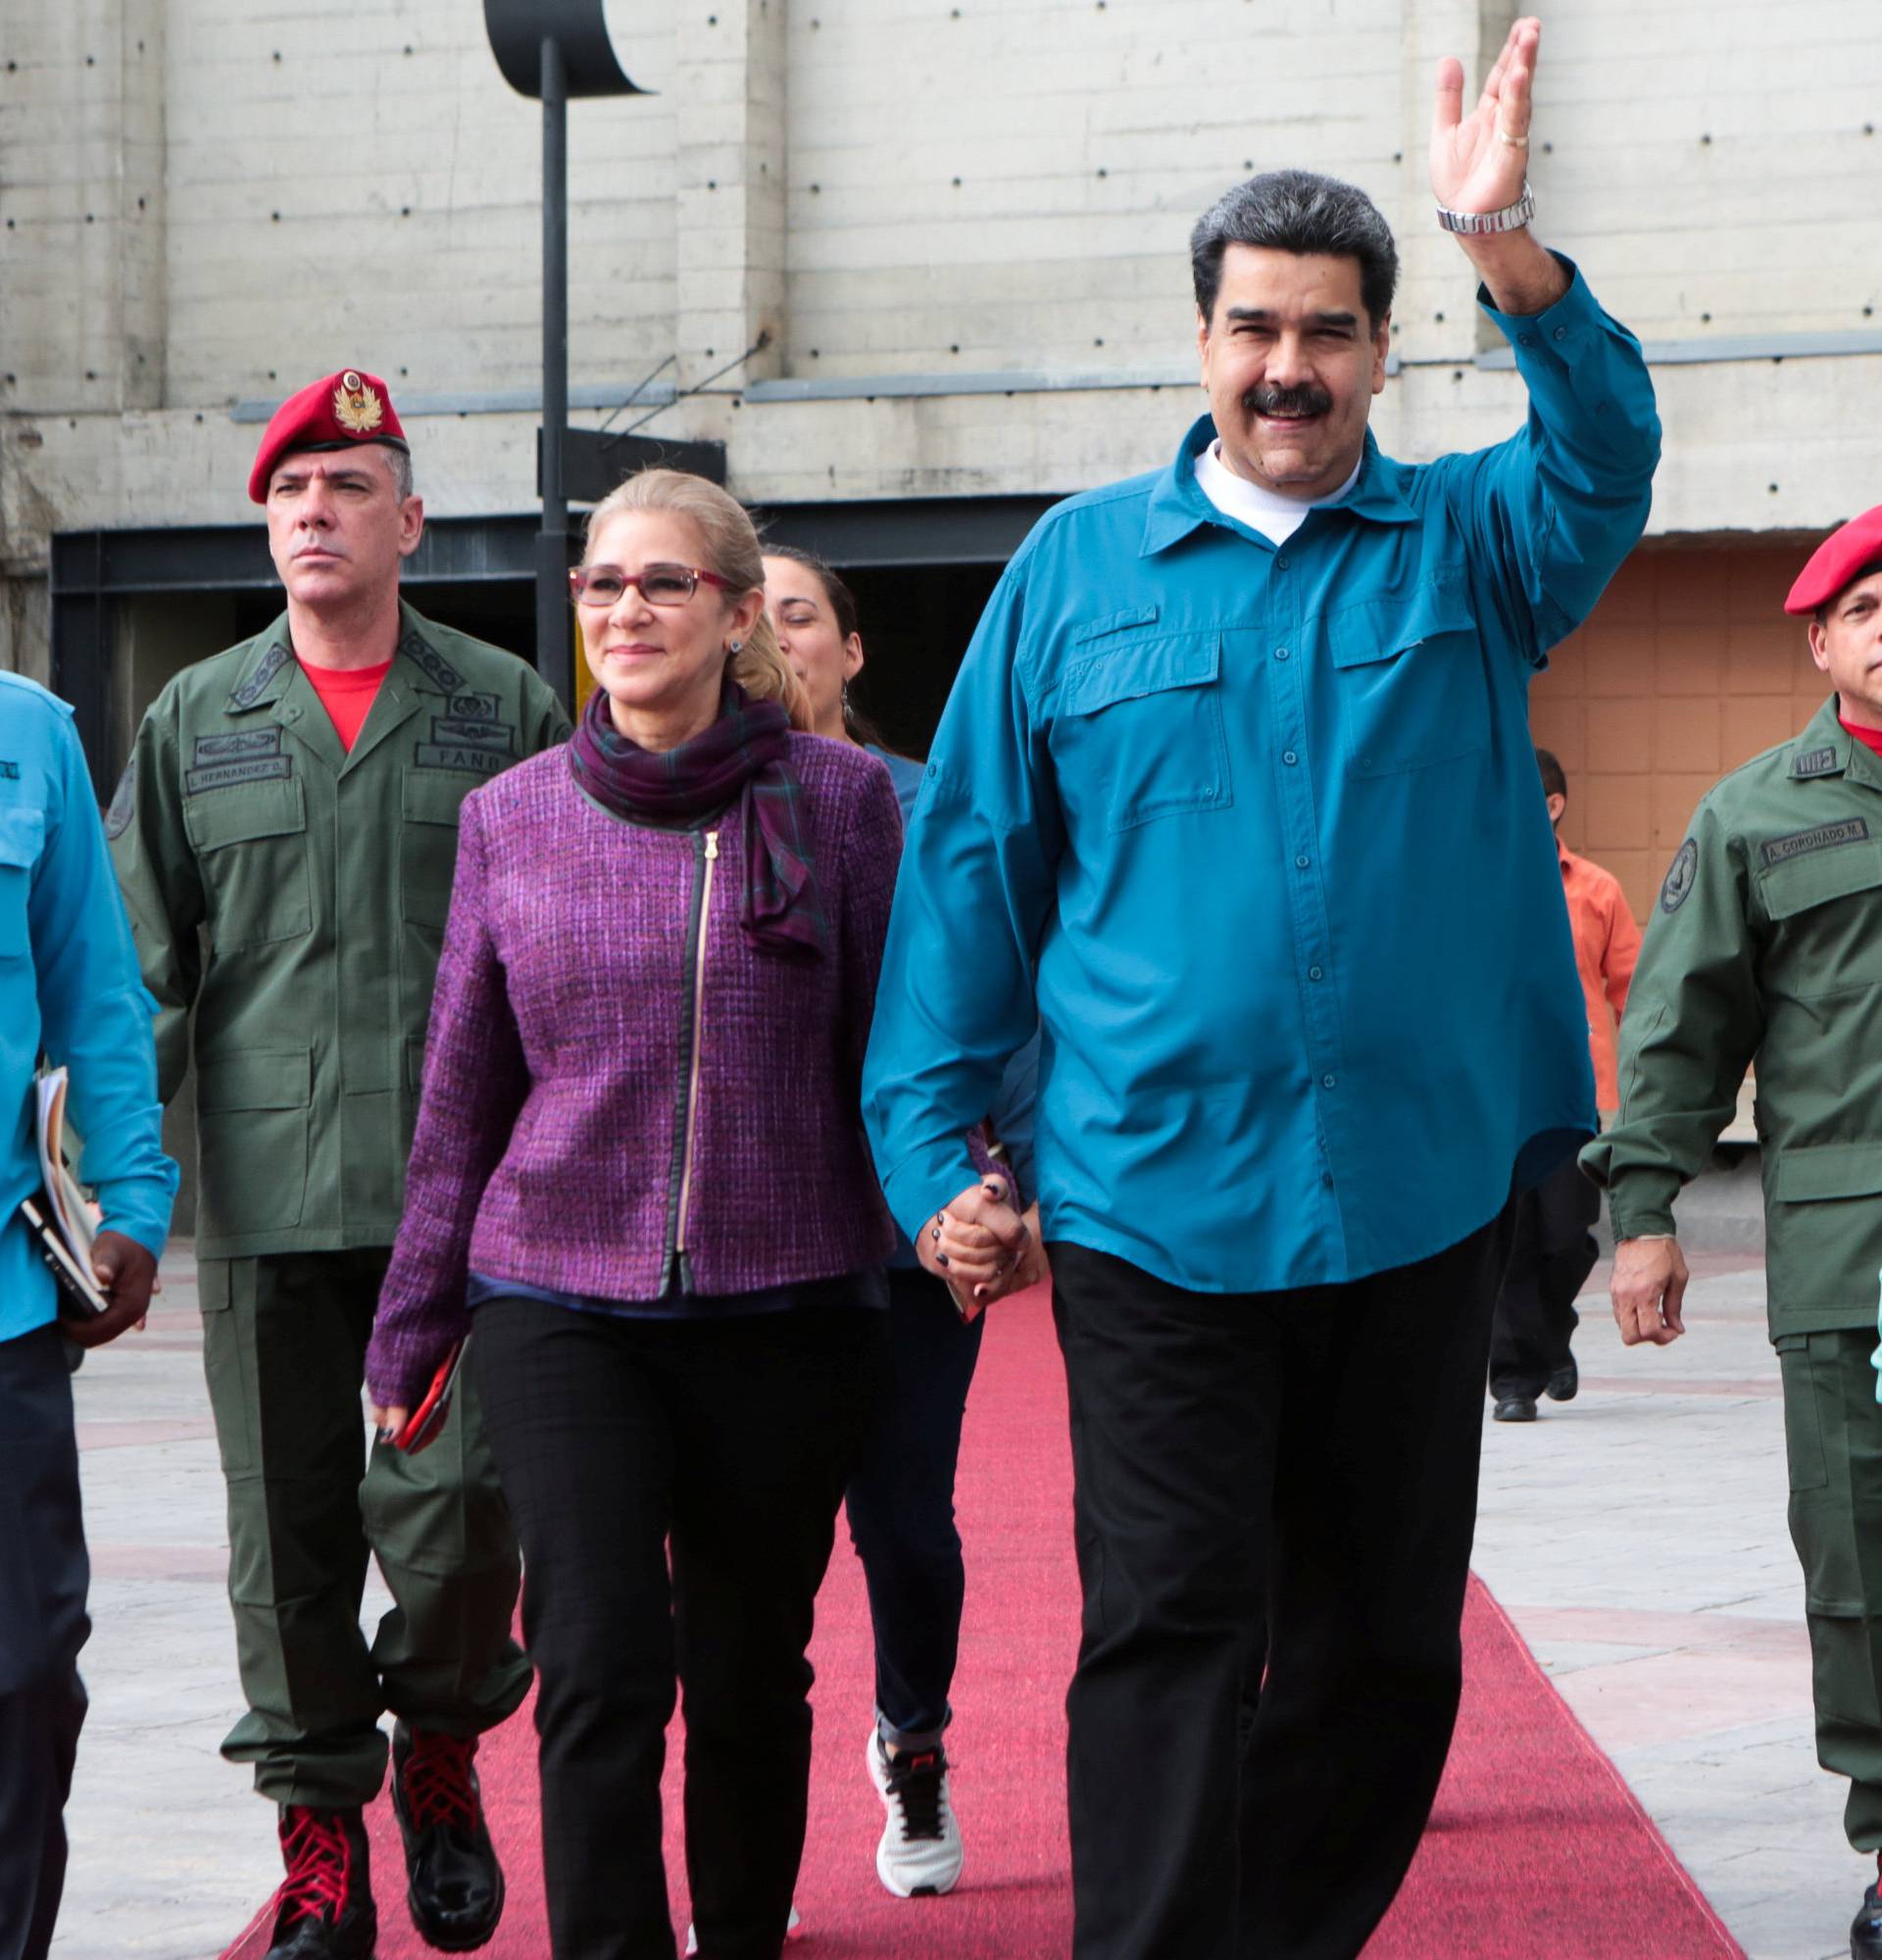 Venezuela's President Nicolas Maduro and his wife Cilia Flores, attend a meeting with supporters in Caracas